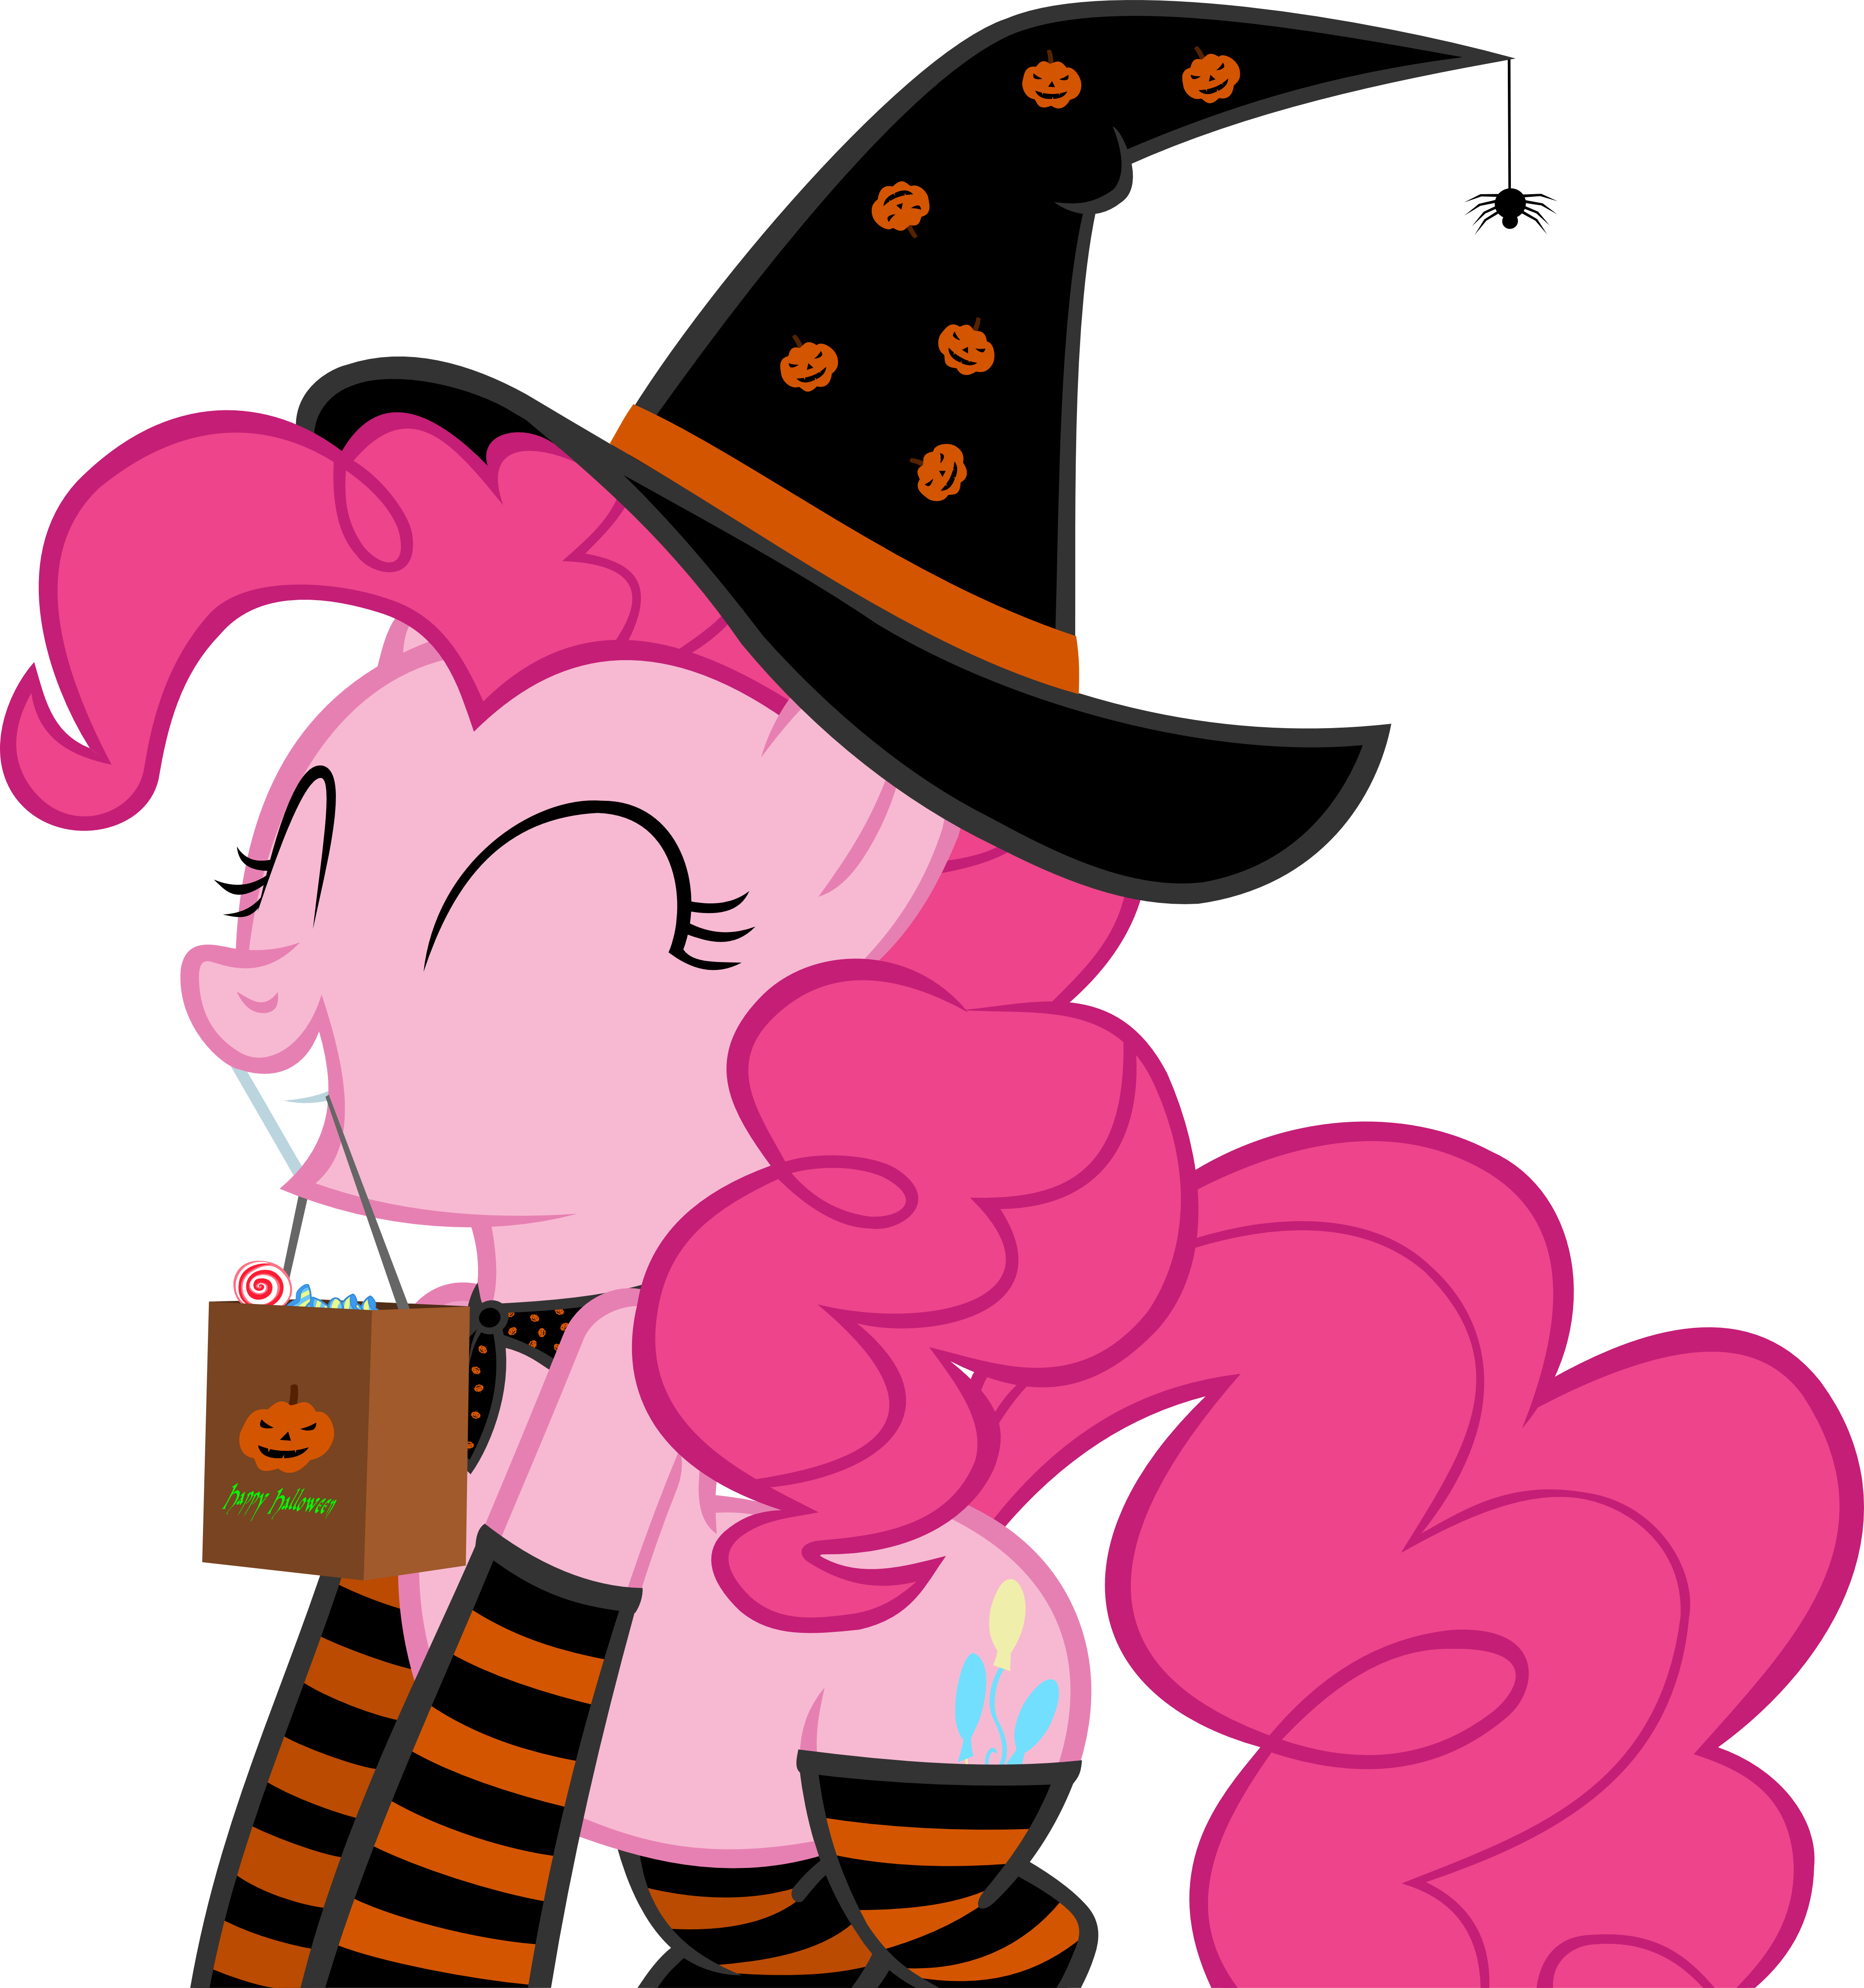 trick_or_treat_by_ironm17-dbs6ev6.png